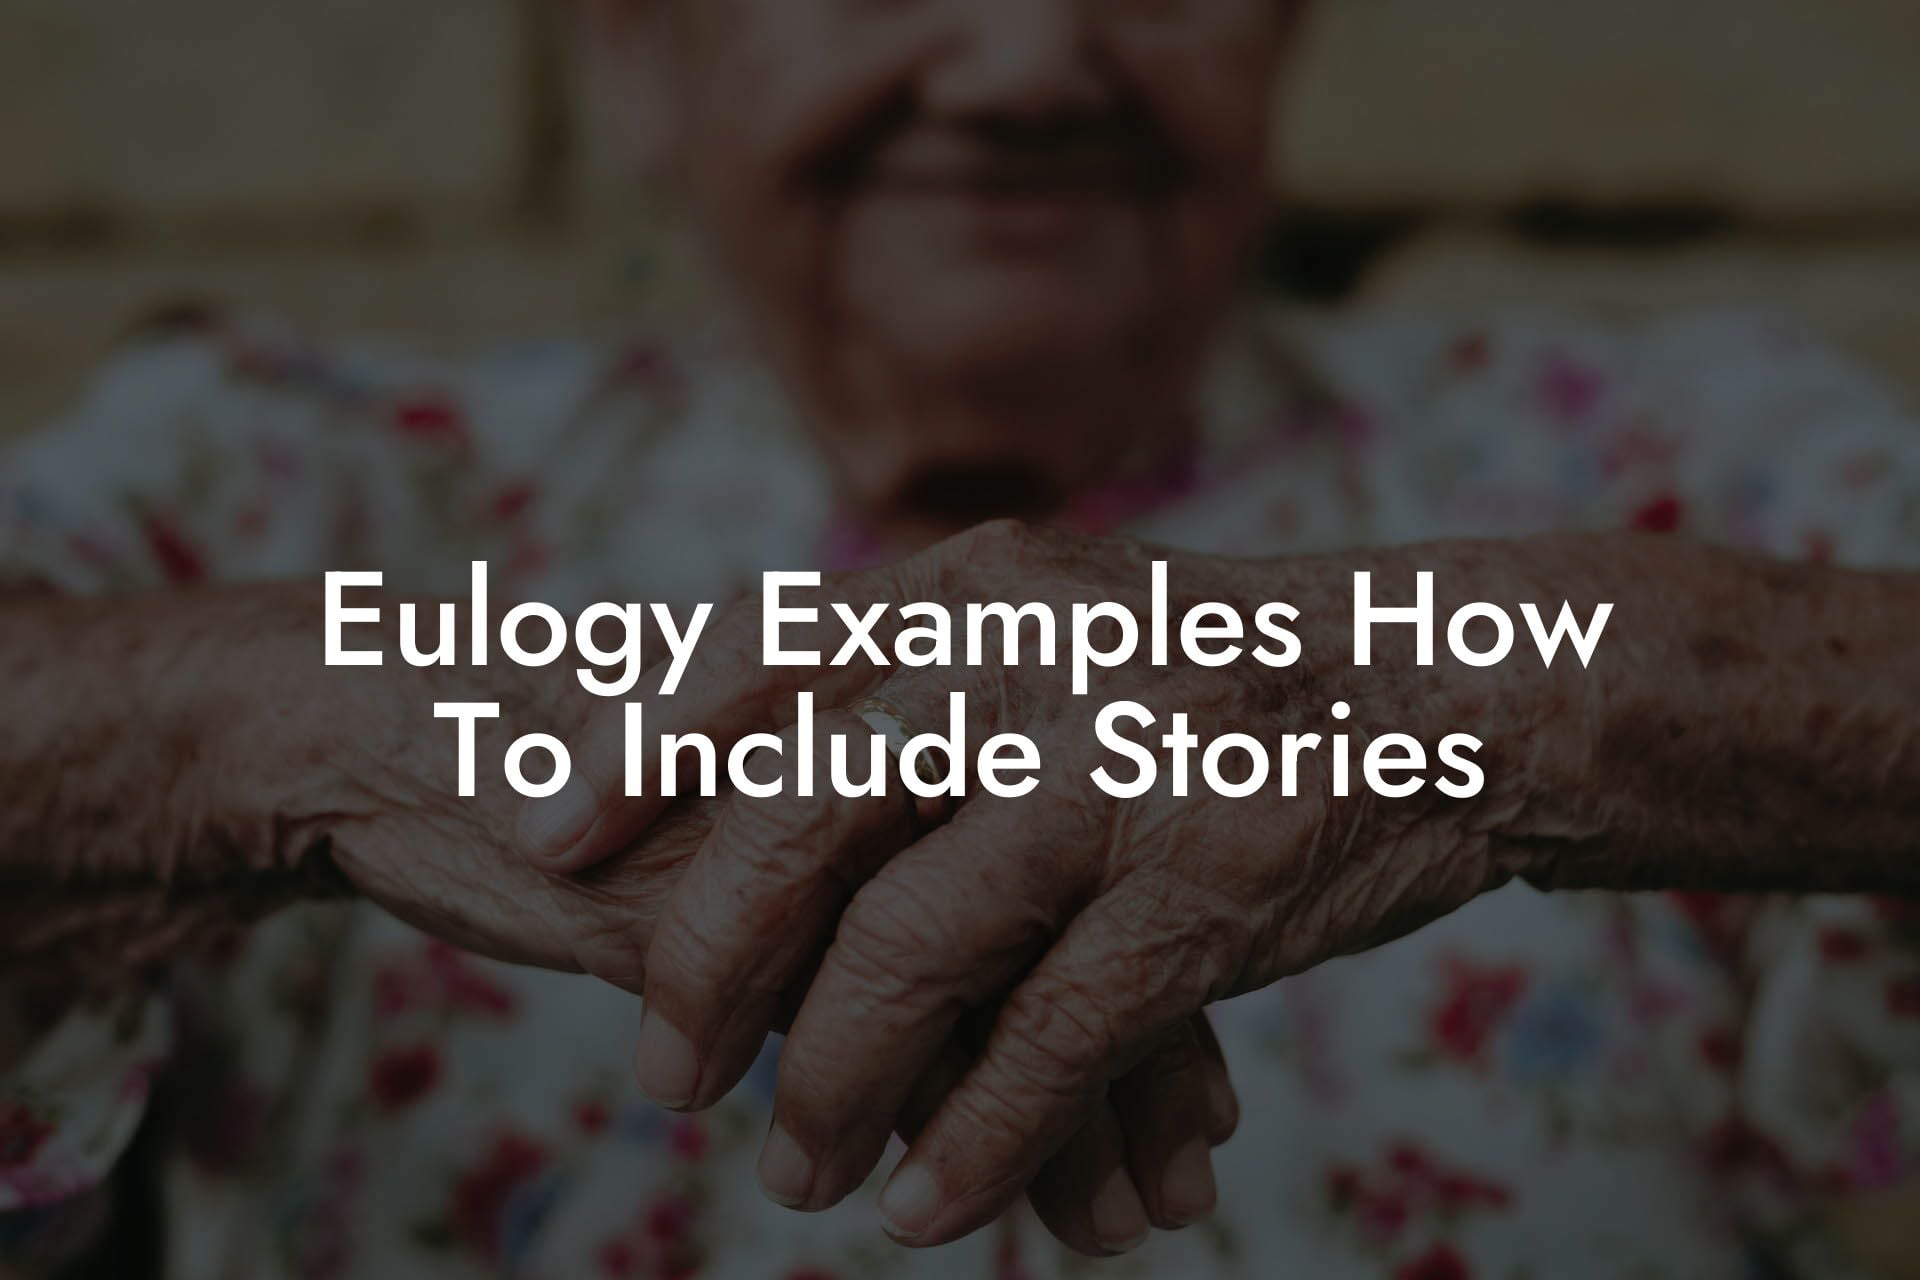 Eulogy Examples How To Include Stories